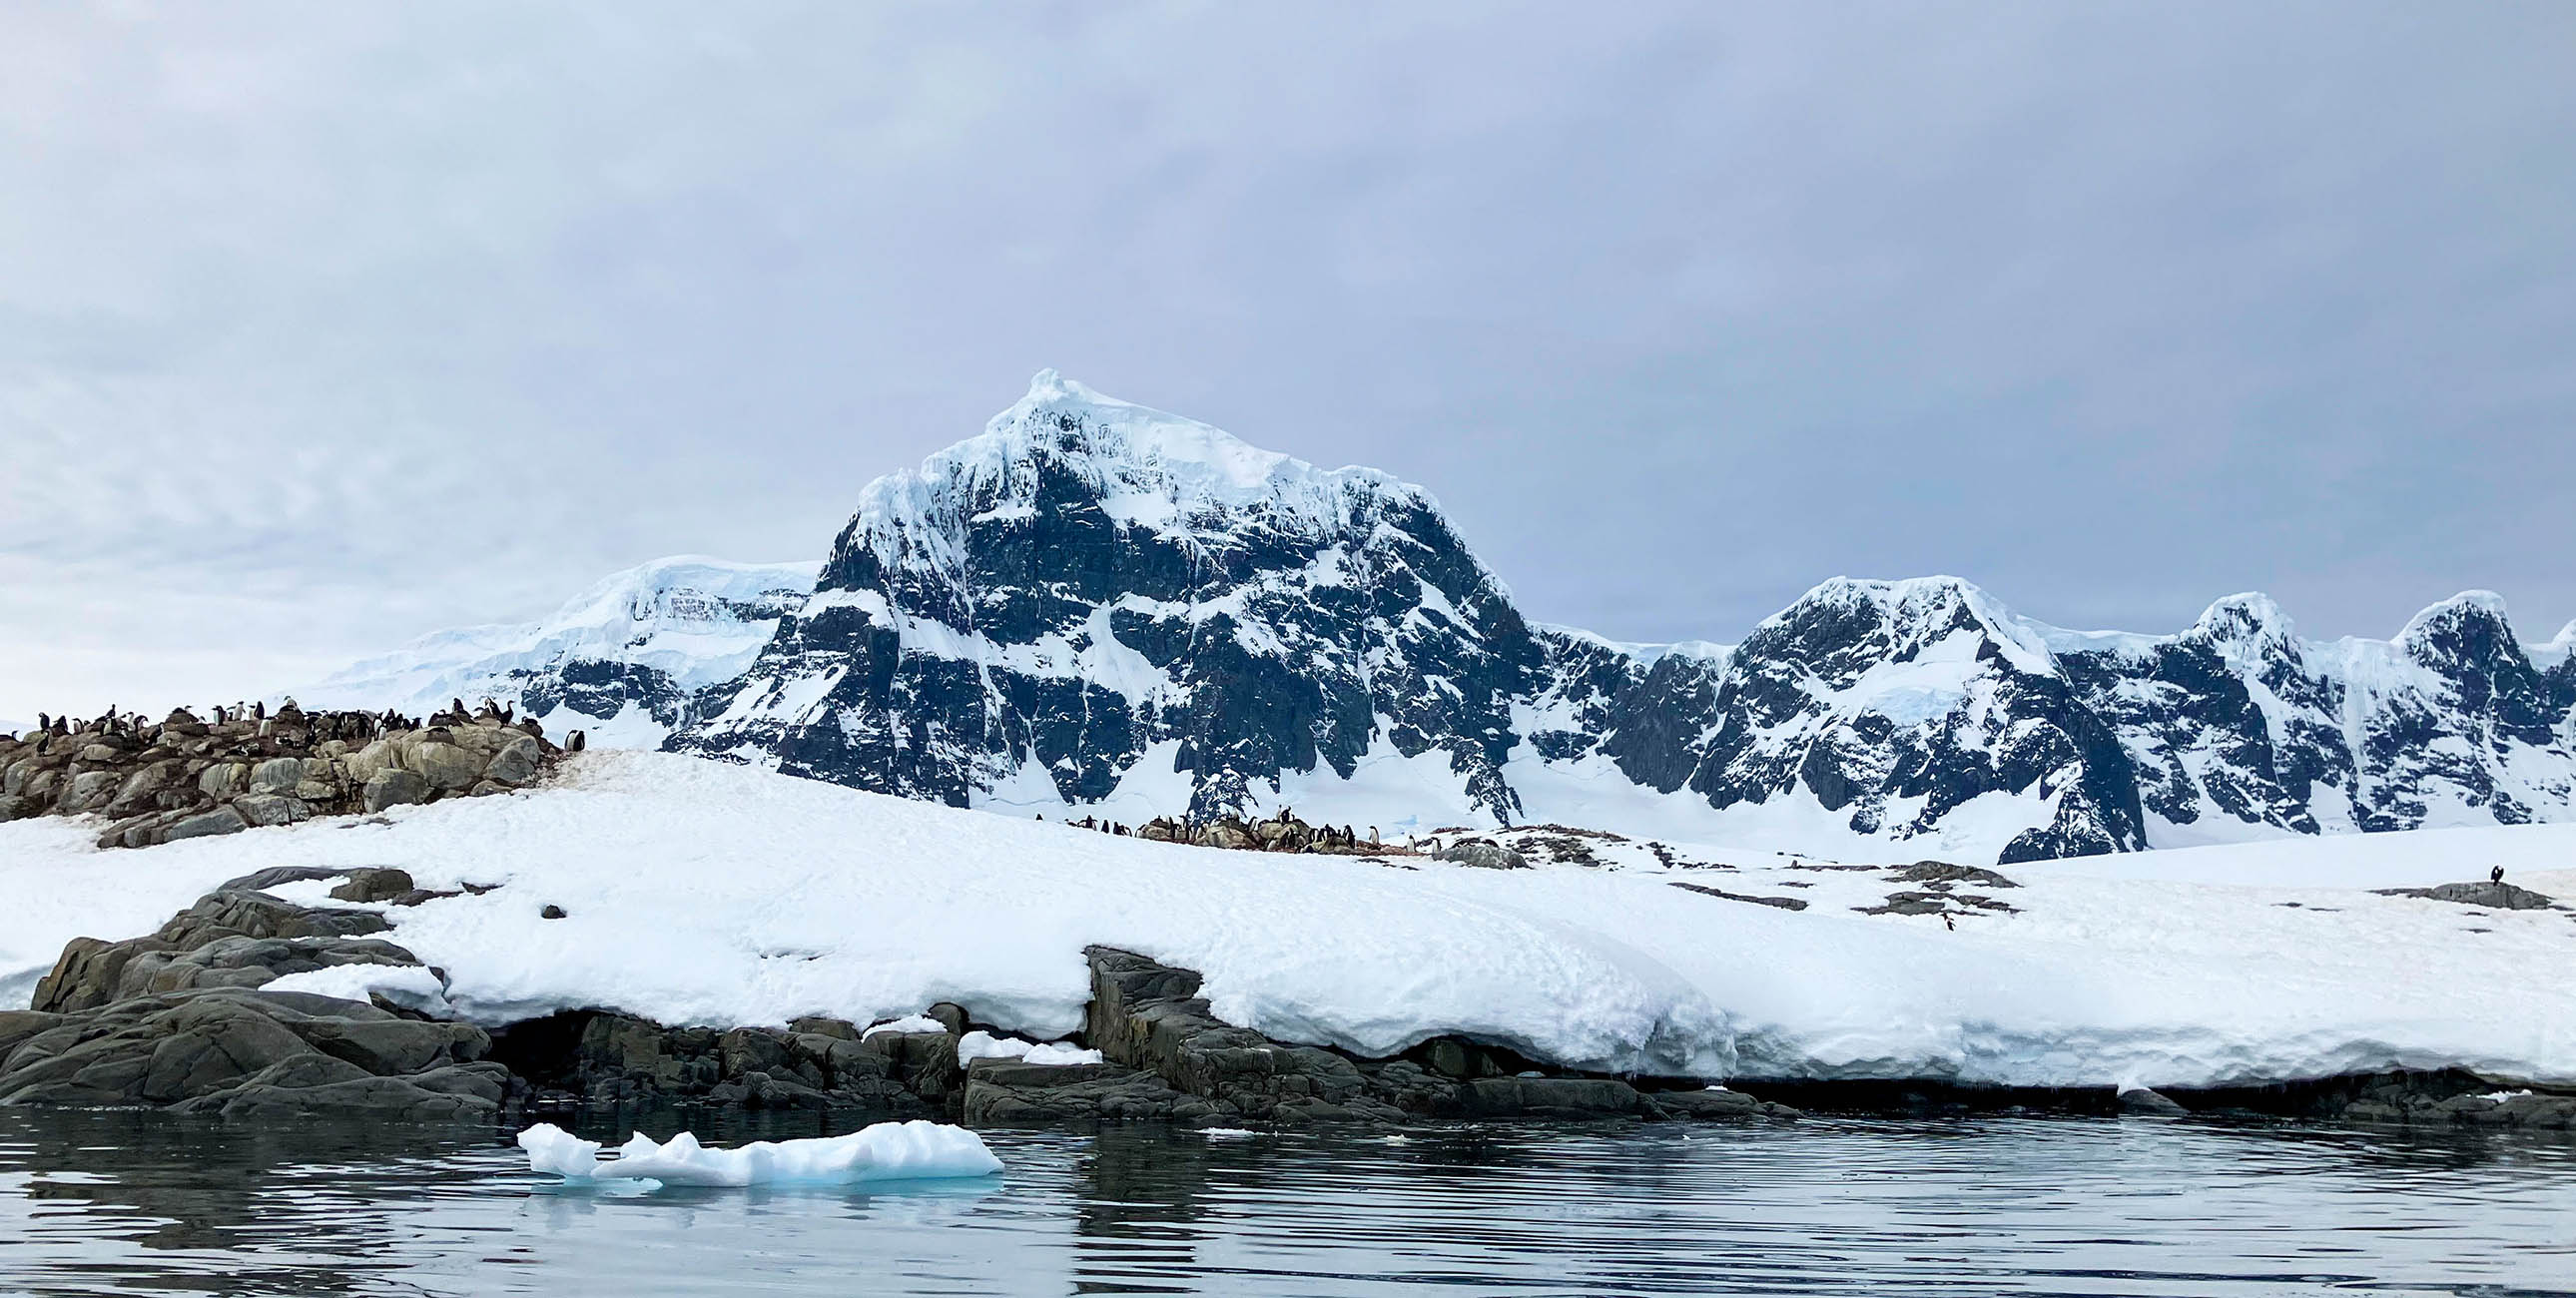 Pew's Nichola Clark wears thick winter gear on a snow-covered shoreline with penguins in the background.